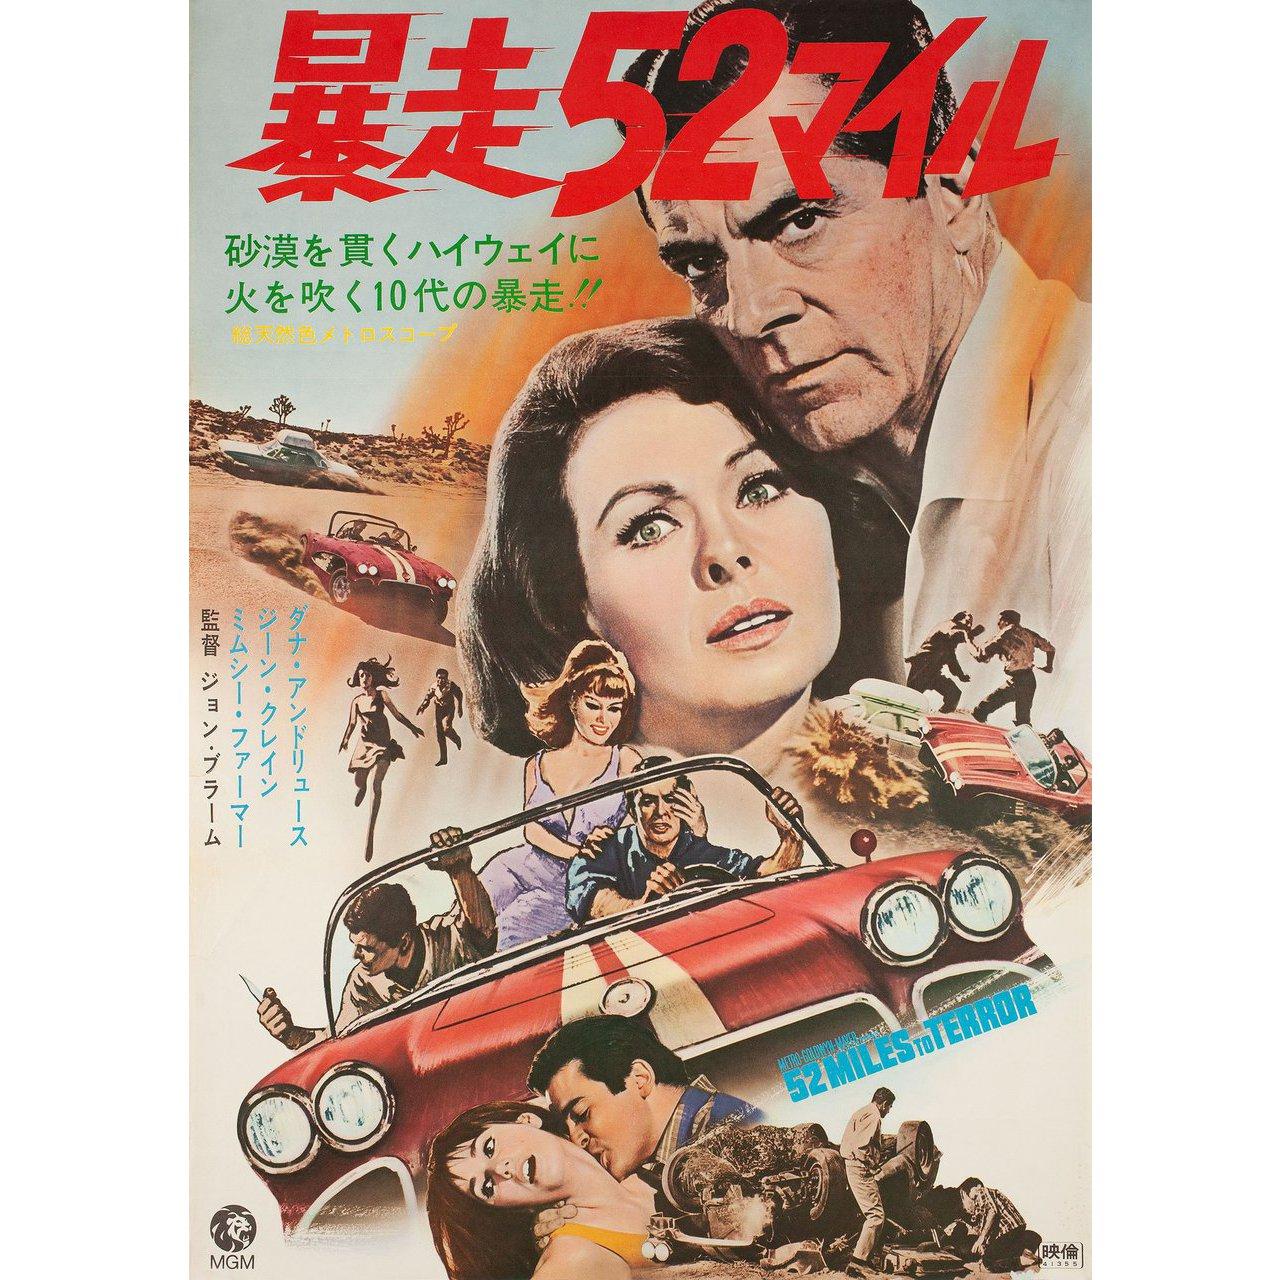 Original 1967 Japanese B2 poster for the film Hot Rods to Hell (52 Miles to Terror) directed by John Brahm with Dana Andrews / Jeanne Crain / Mimsy Farmer / Laurie Mock. Very Good-Fine condition, rolled. Please note: the size is stated in inches and